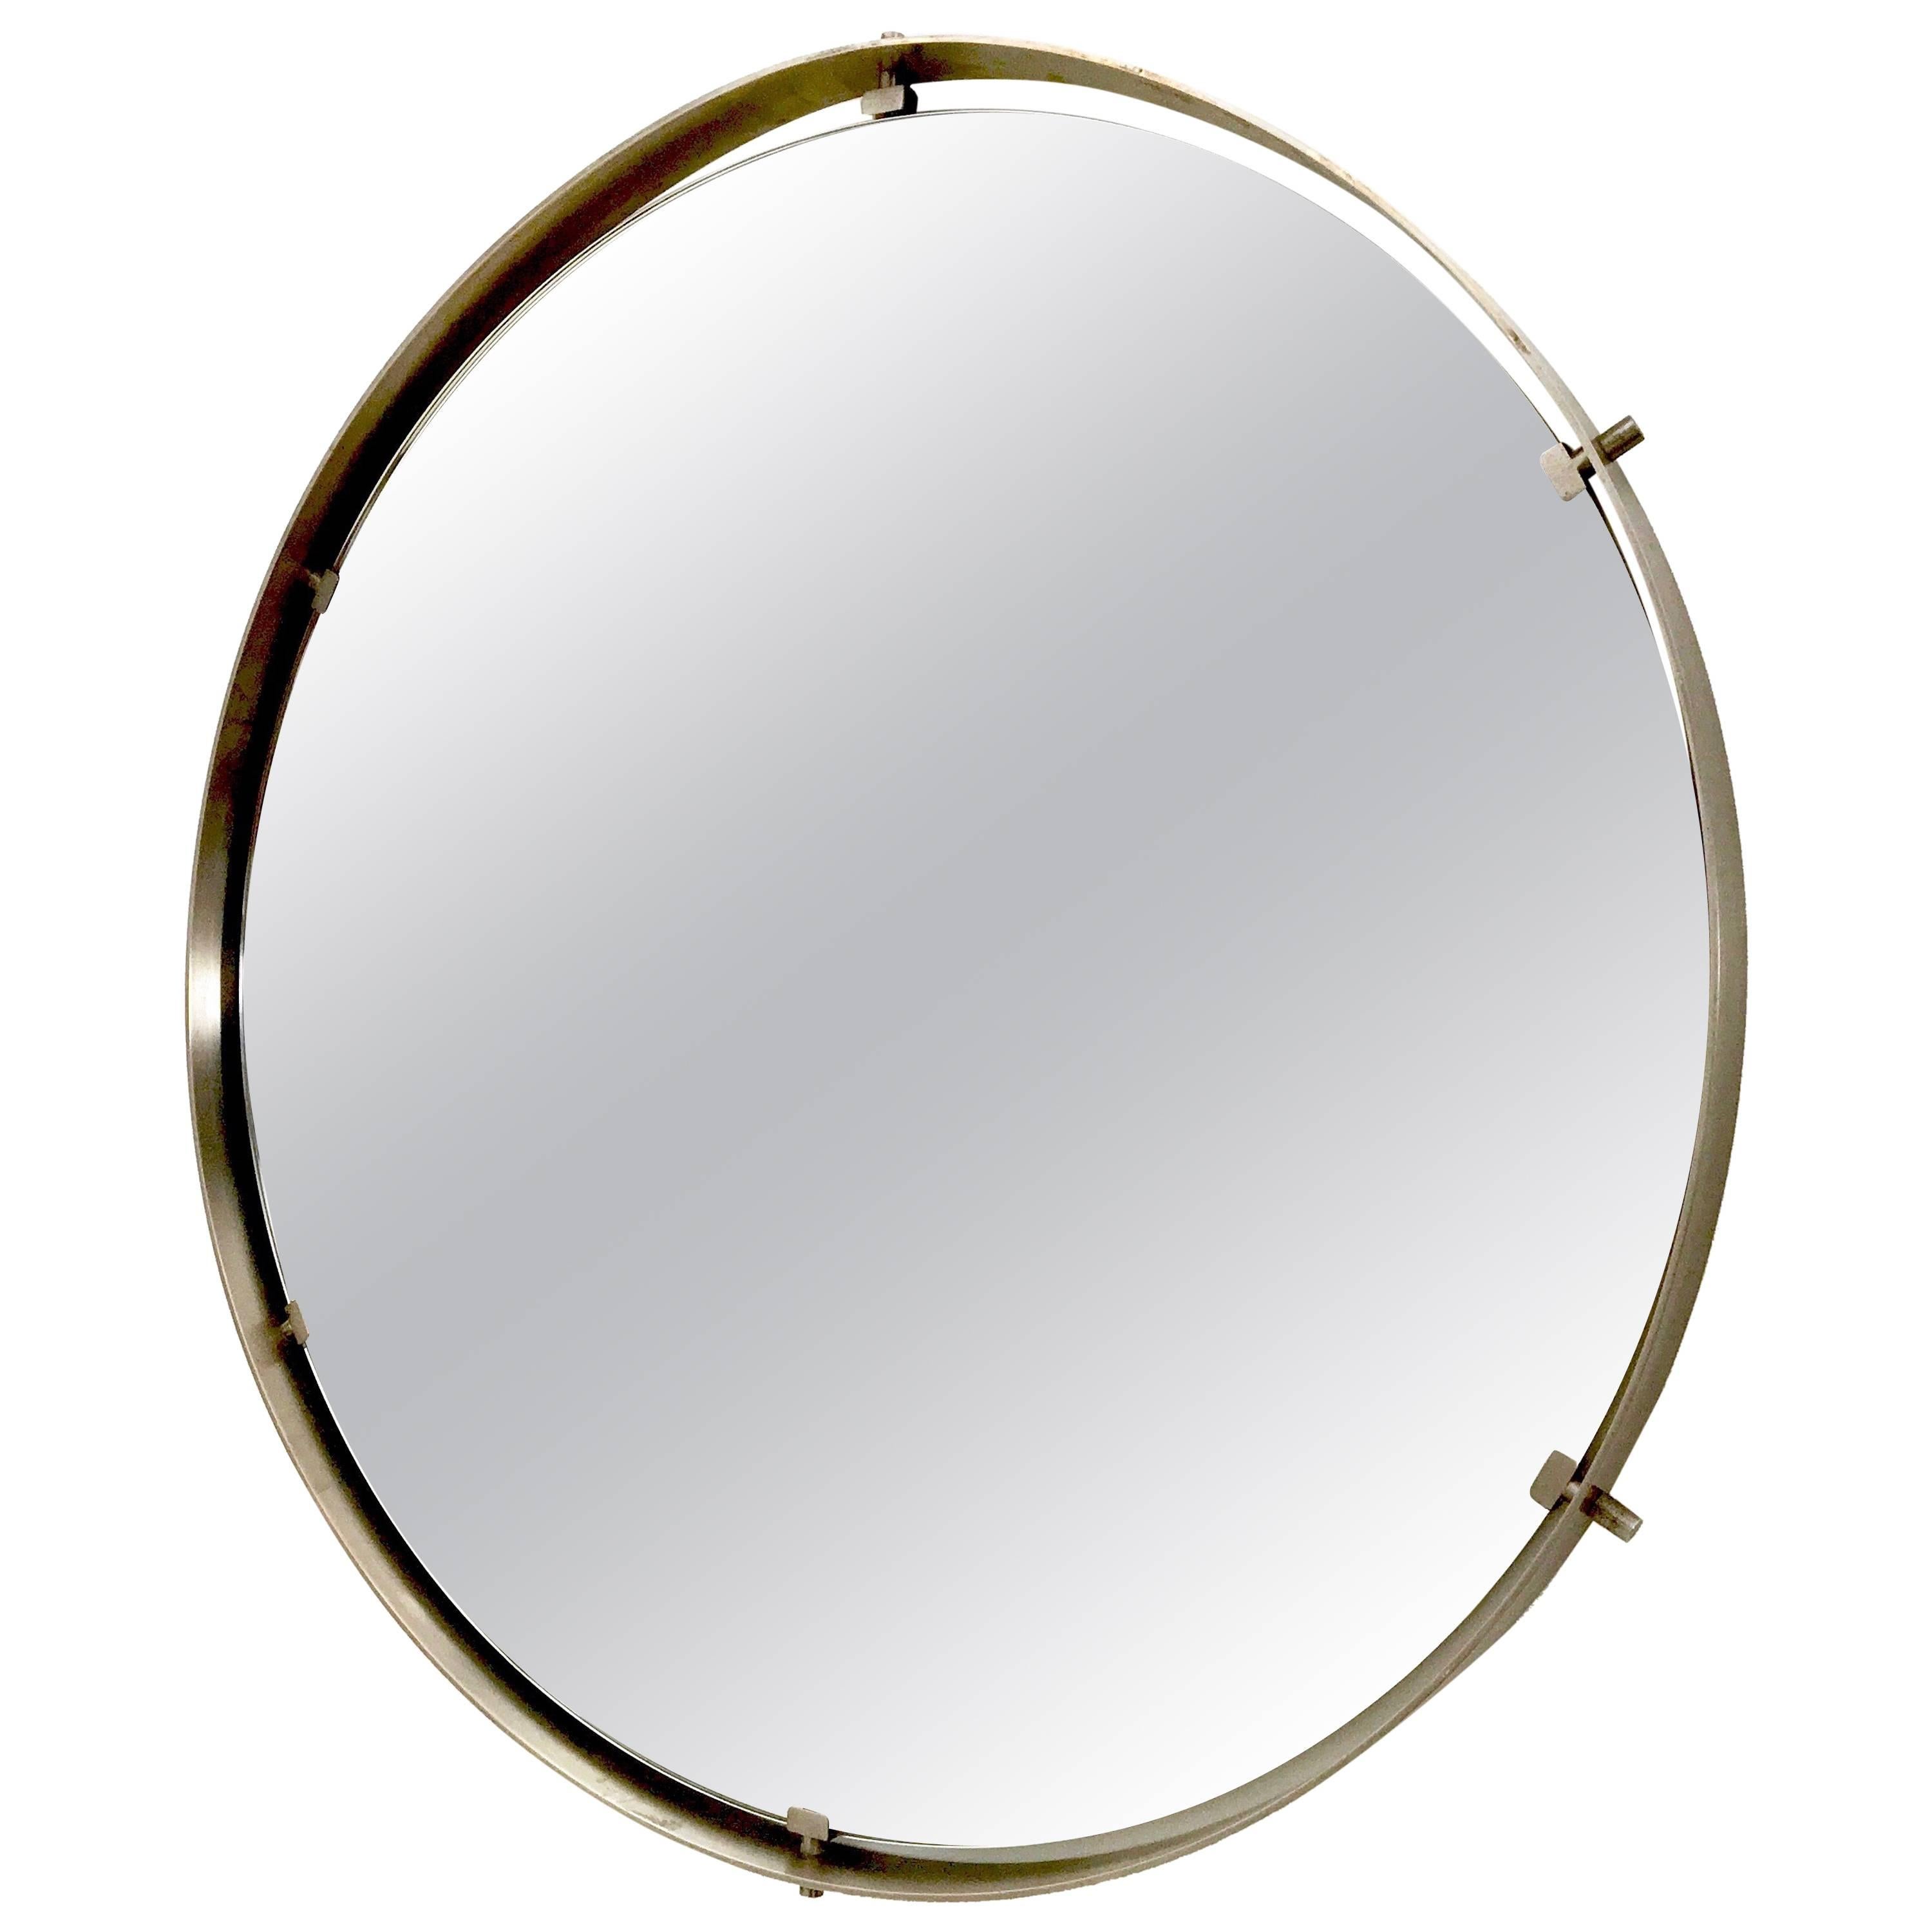 Round Nickel-Plated Brass Wall Mirror, Italy, 1960s